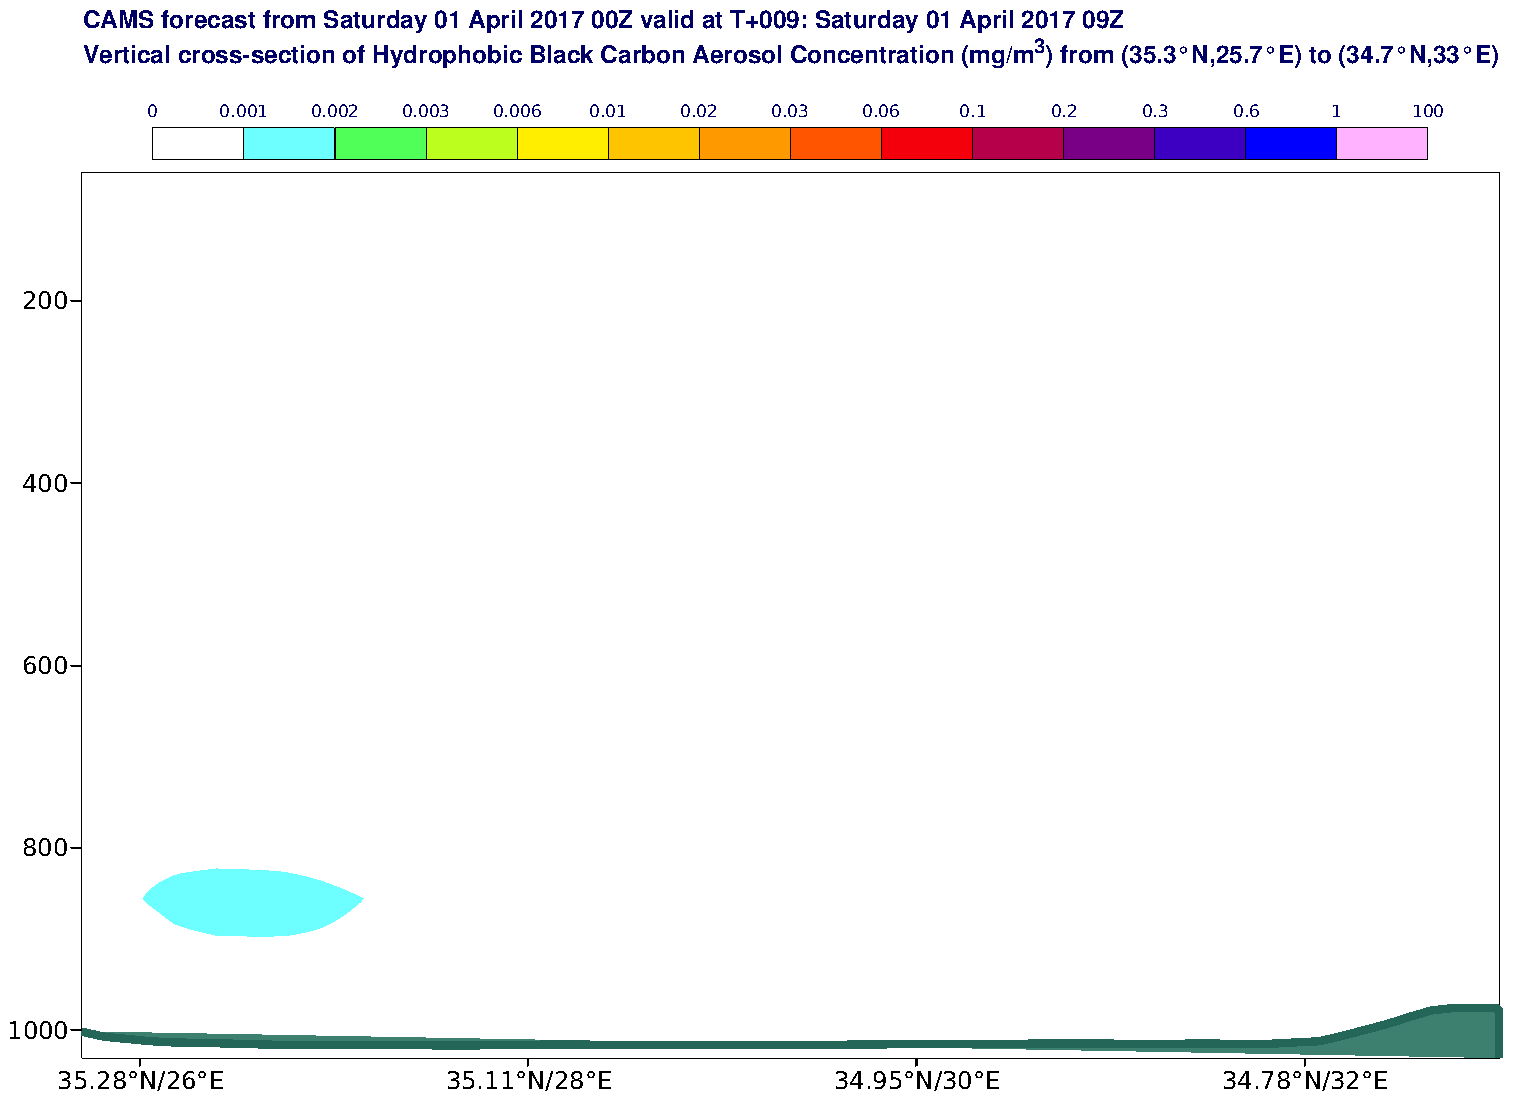 Vertical cross-section of Hydrophobic Black Carbon Aerosol Concentration (mg/m3) valid at T9 - 2017-04-01 09:00